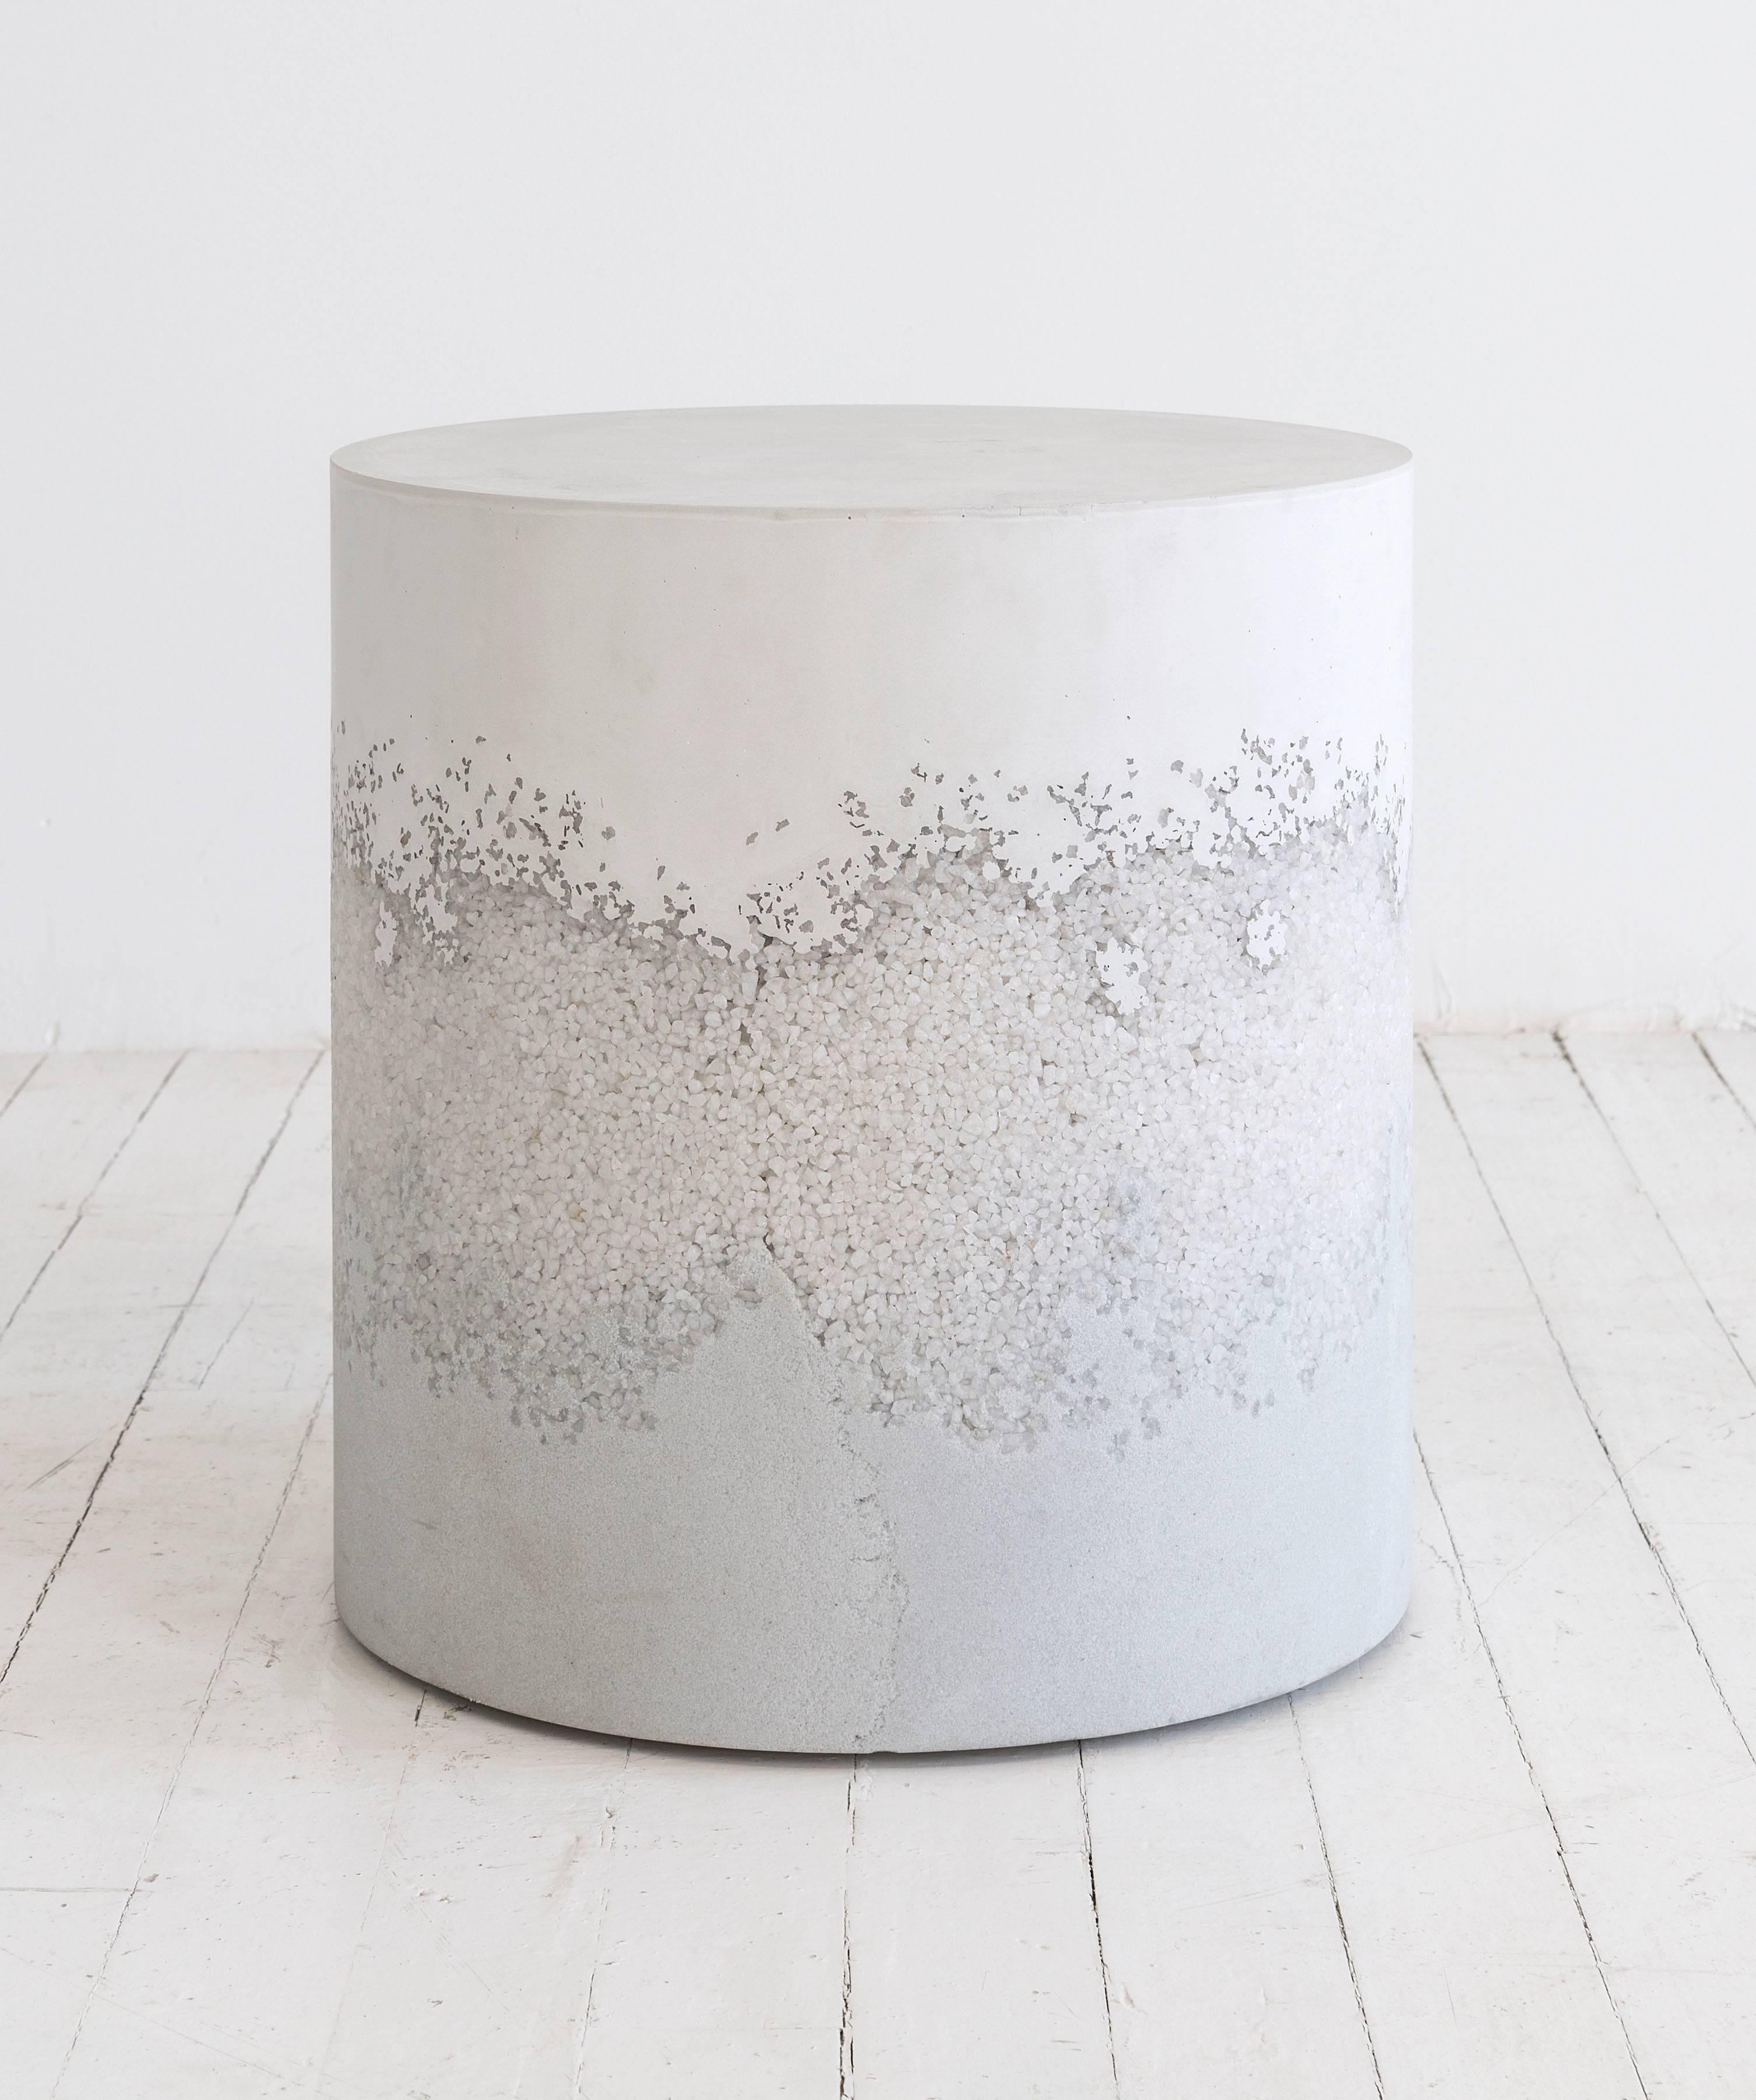 This made-to-order drum consists of a hand-dyed white cement top, a packed crystal quartz centre, and a packed powdered glass bottom. The cement is poured by hand over the aggregates, creating an organic blend between the materials. The piece has a